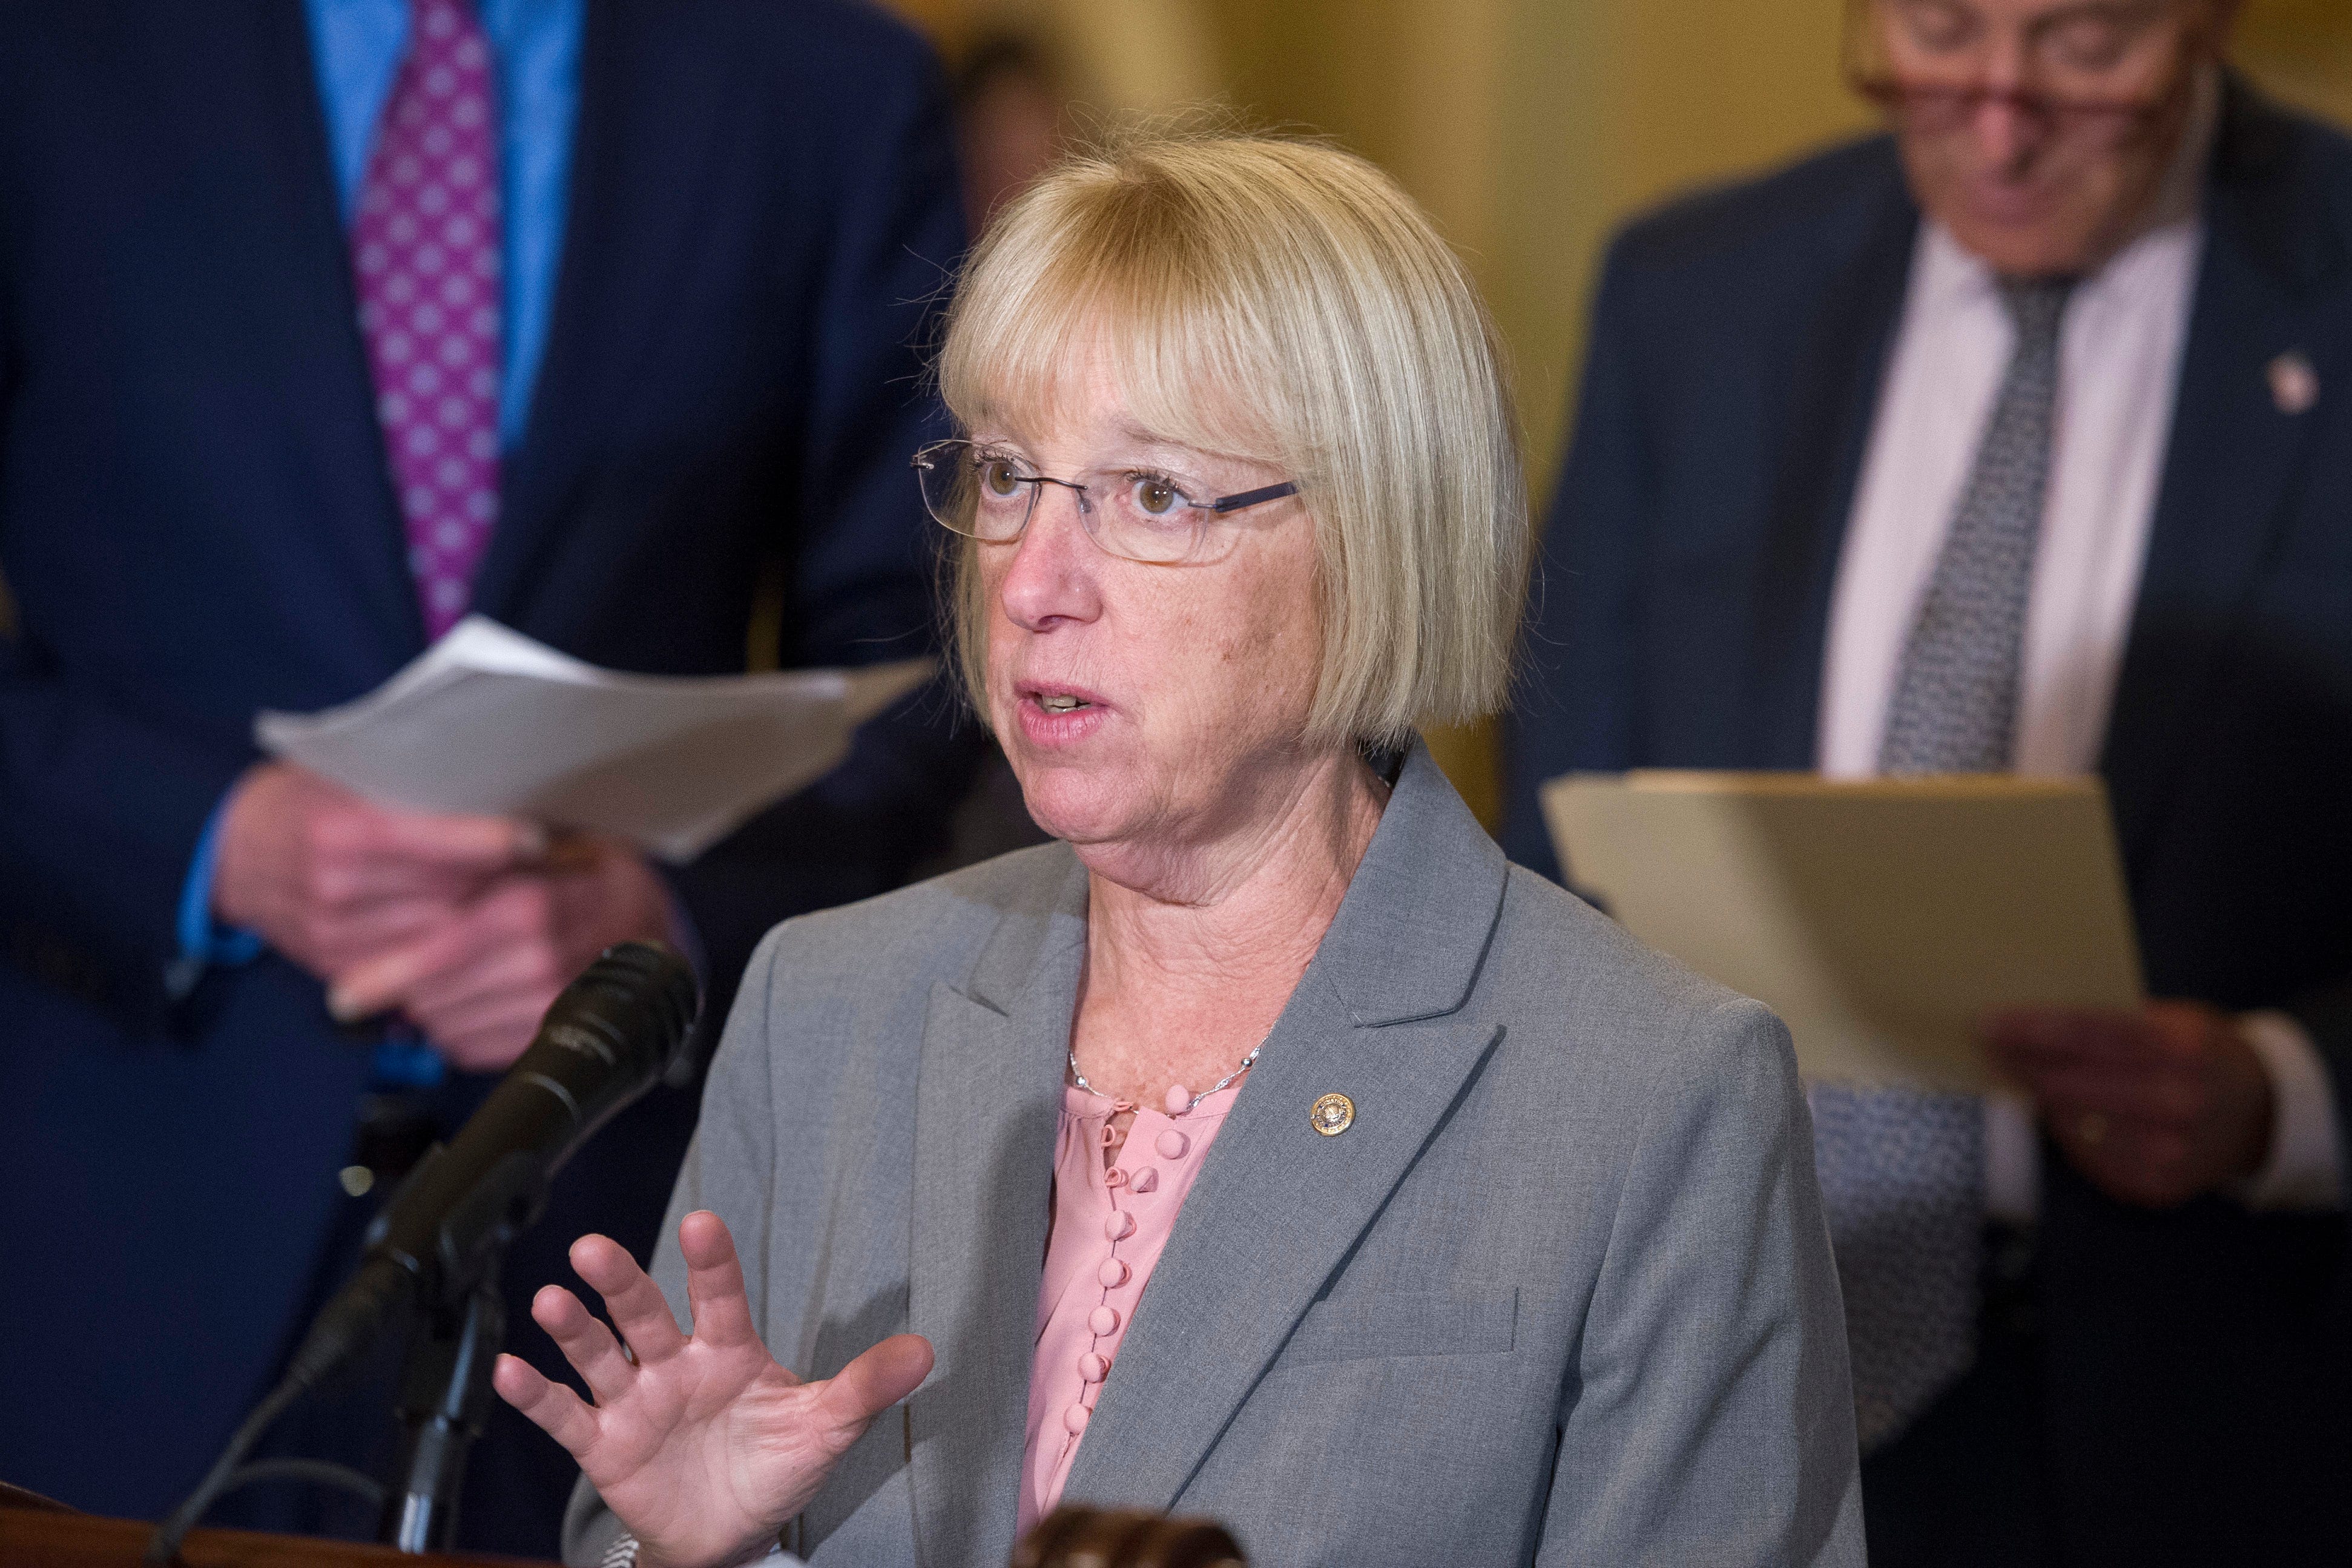 Sen. Patty Murray, D-Wash., is co-sponsoring a bill that would require insurers to pay out-of-network doctors and hospitals the median – or midpoint – rate paid to in-network providers.